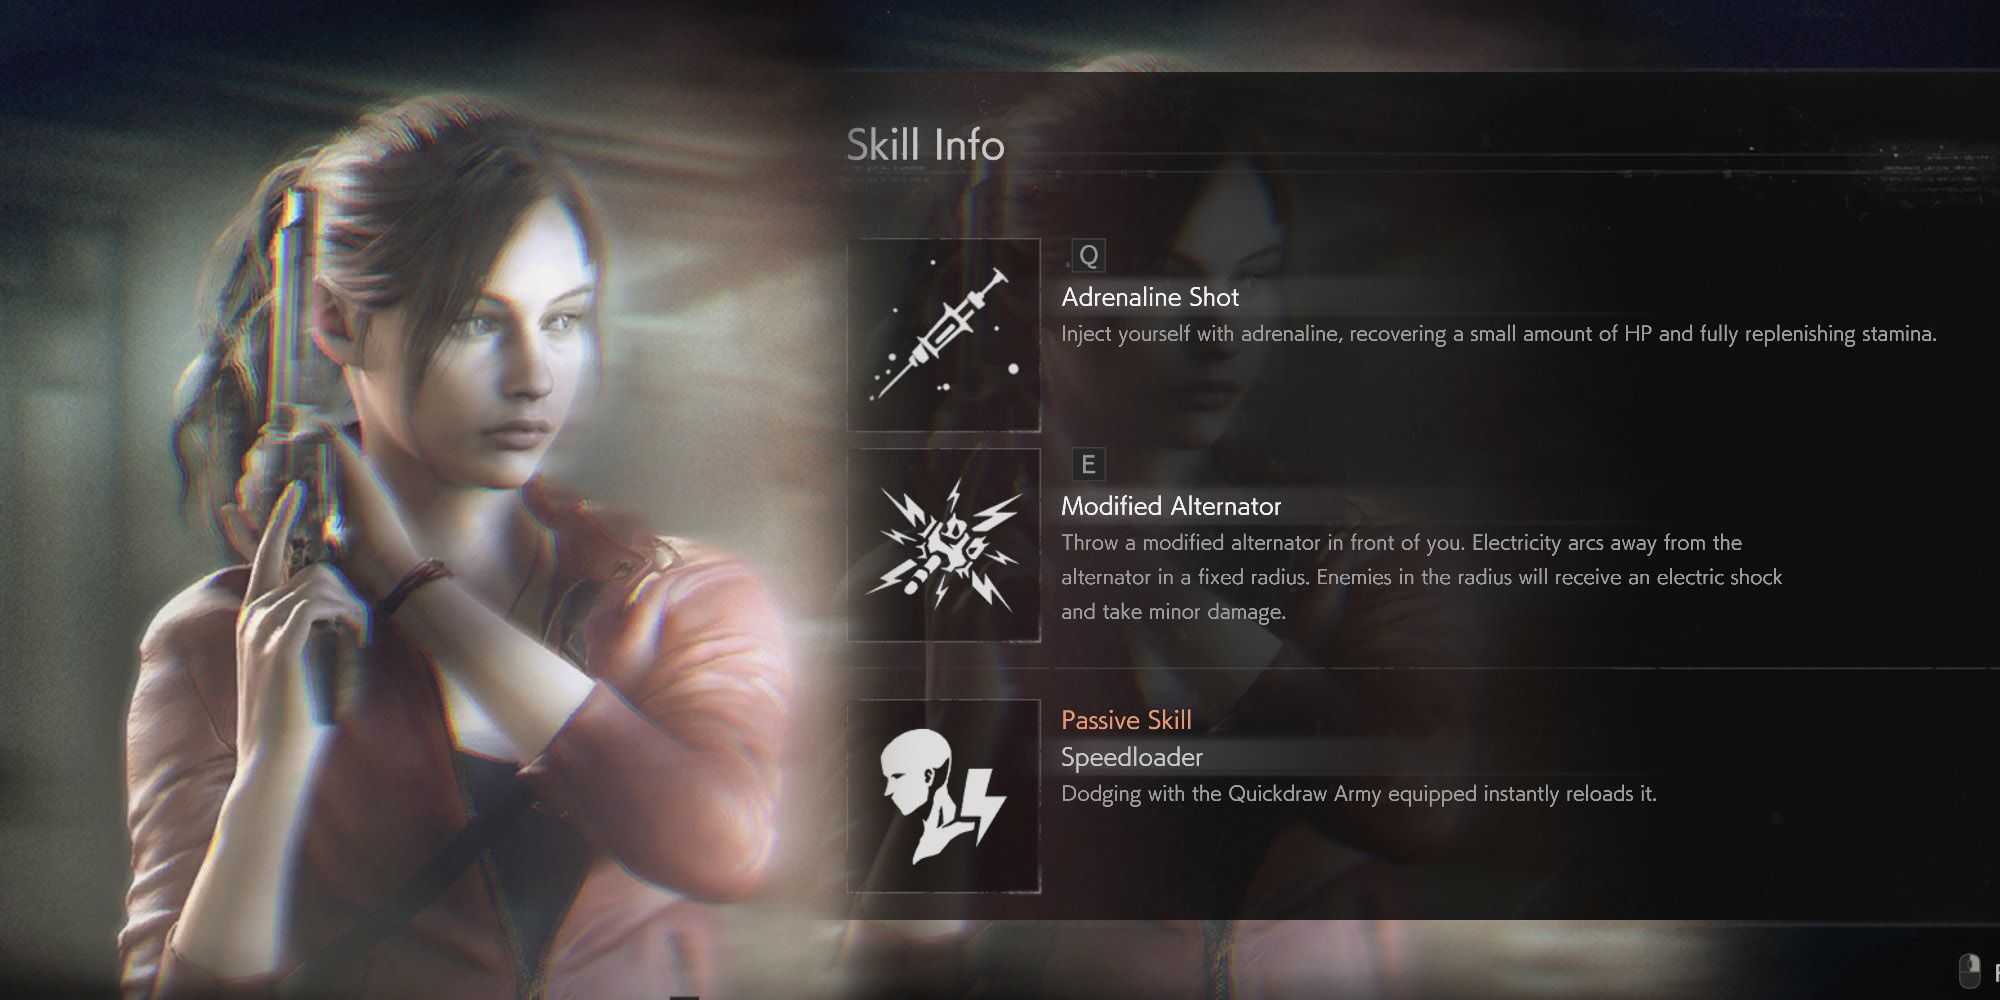 Resident Evil ReVerse - Claire Redfield Portrait In-Game Next To Skill Descriptions